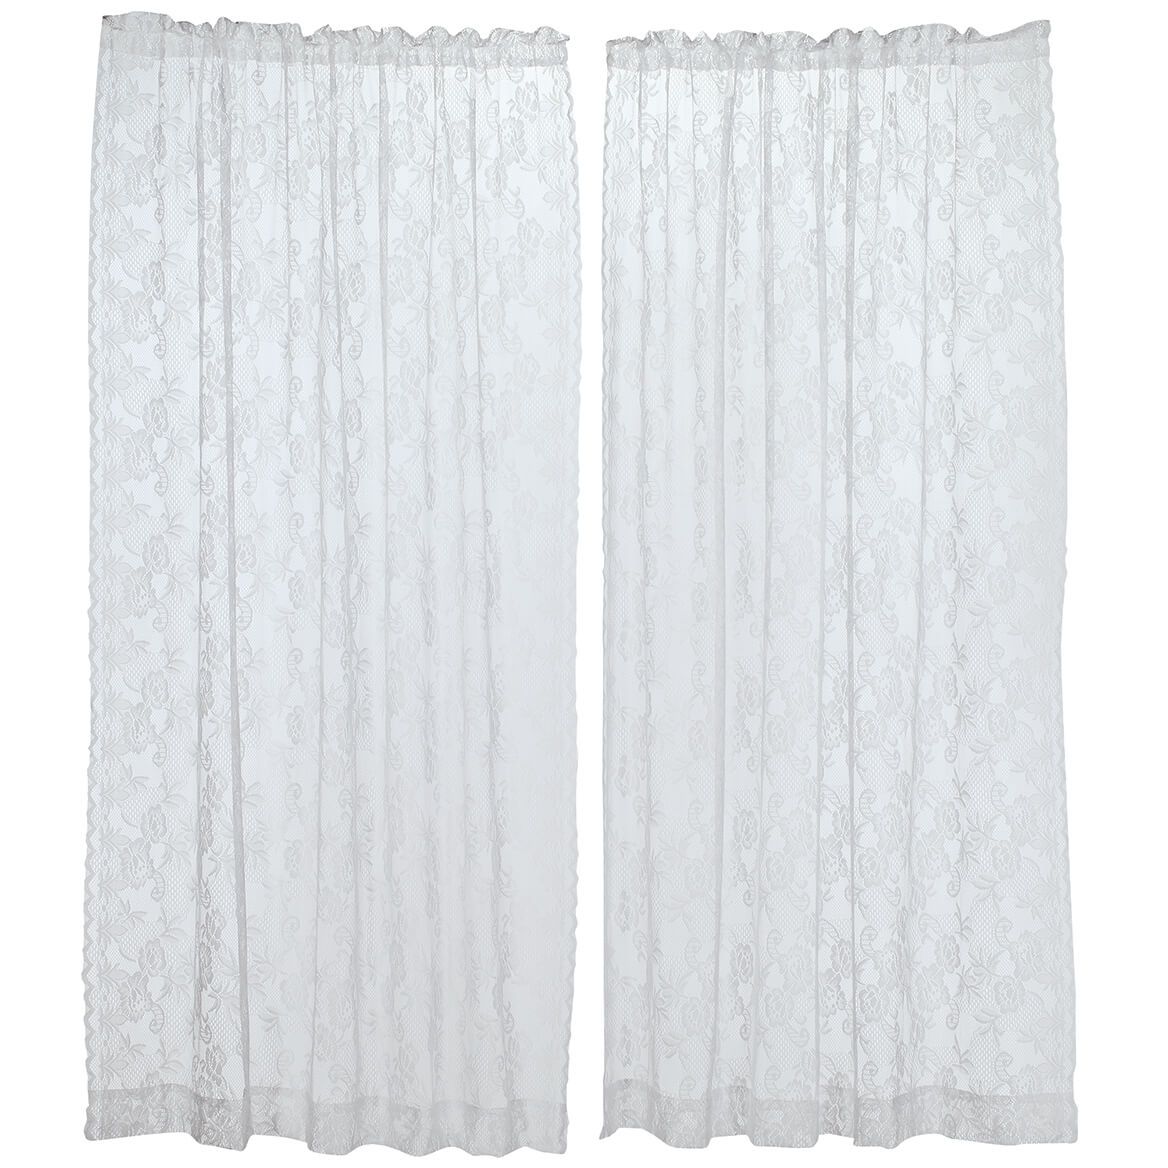 Floral Lace Curtain Panels, Set of 2 + '-' + 372936